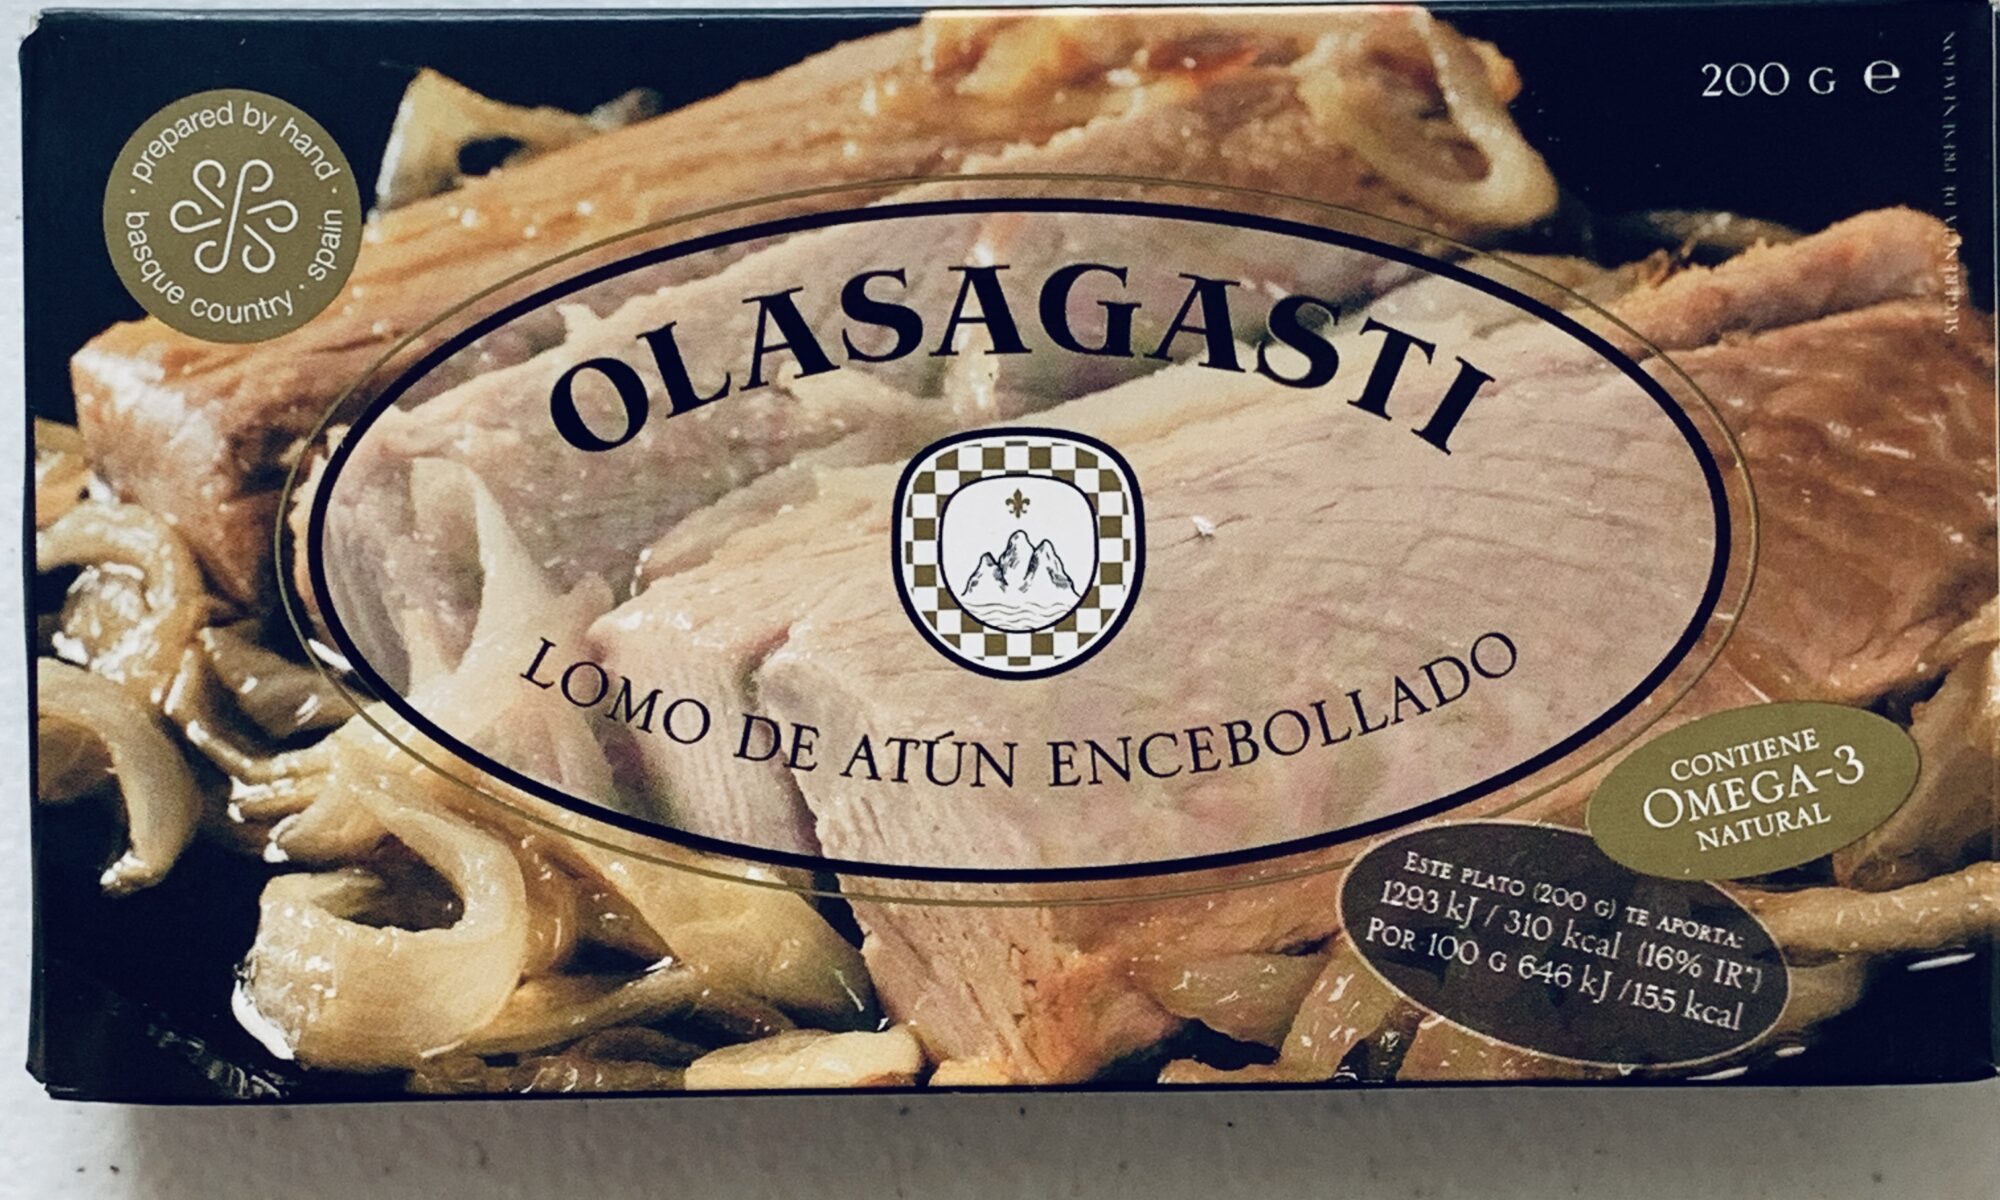 Image of the front of a package of Olasagasti Lomo de atún encebollado (Tuna Fillet with Sauteed Onion and Balsamic Vinegar)